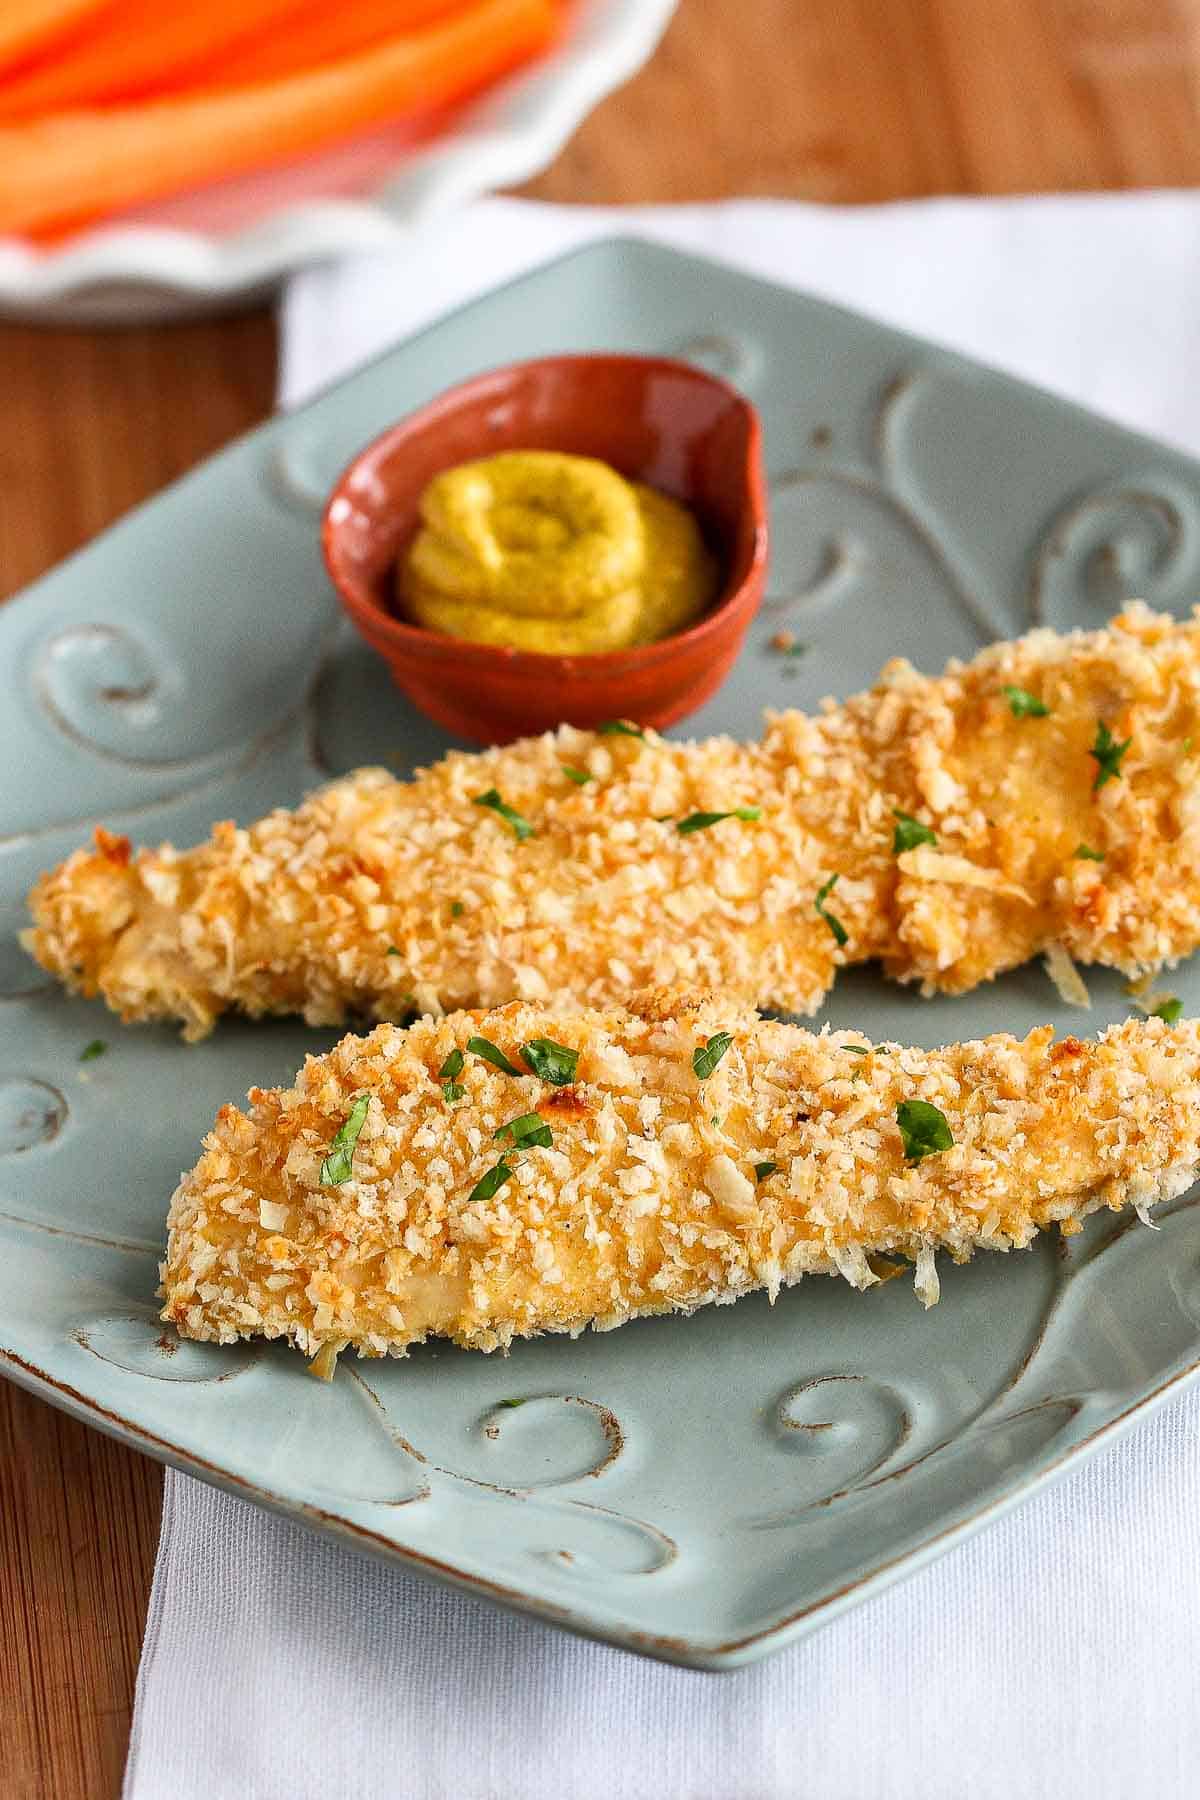 Crispy, delicious, and healthier than traditional fried chicken strips - check out this easy recipe for baked panko chicken strips that the whole family will love! | Recipes dinner | Recipes healthy | Recipes tenders